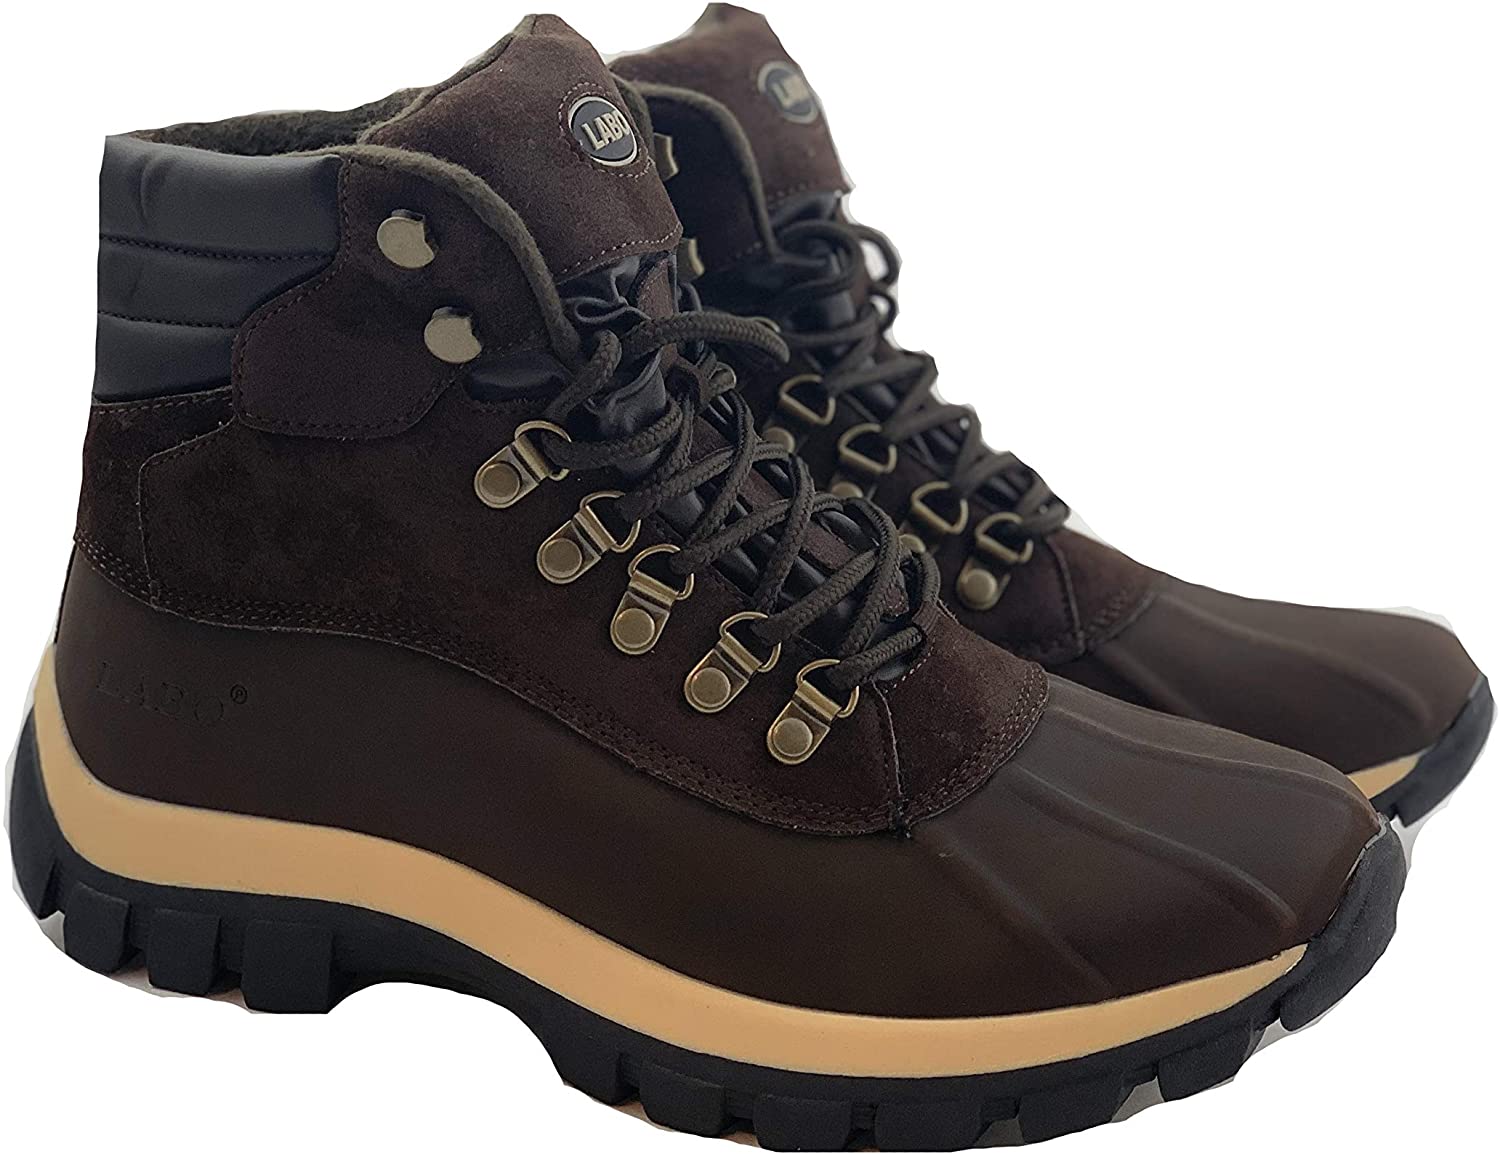 LABO Mens Snow Boots Waterproof Insulated Lace UP-103 by CITISHOESNYC